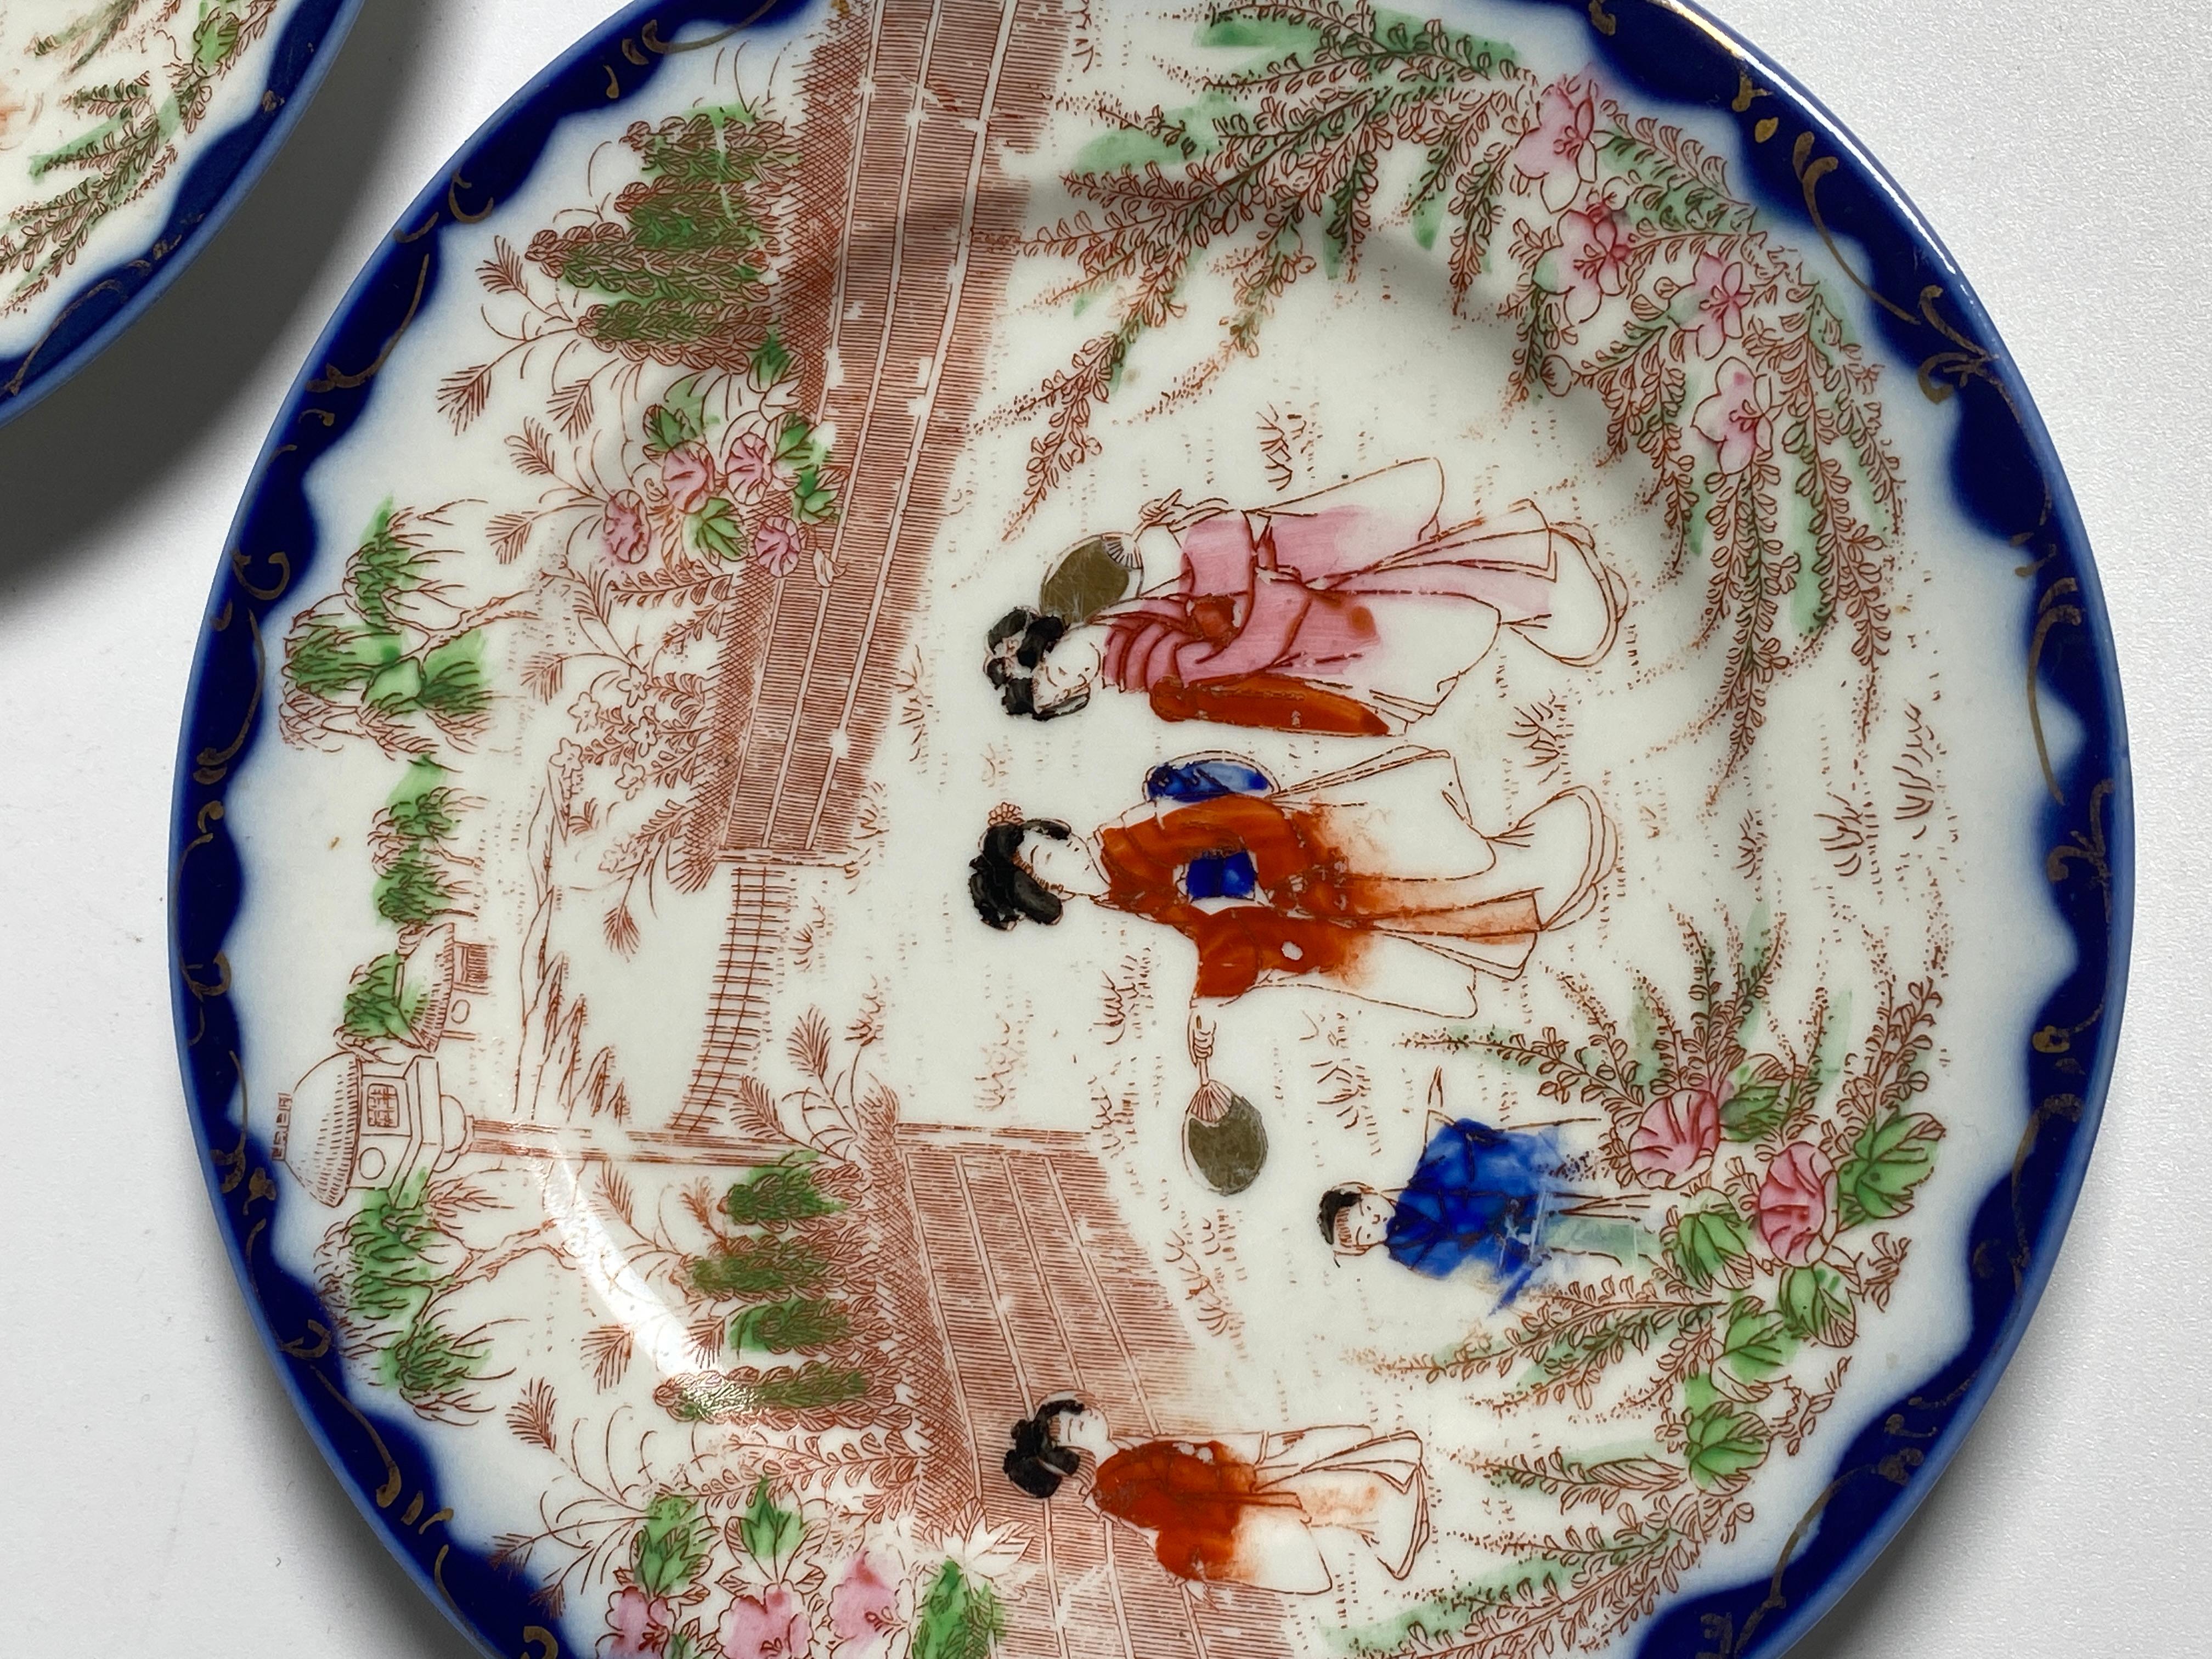 Pair of Japanese porcelain plates. The colors are blue, pink and green. They were made in Japan in the 19th century.